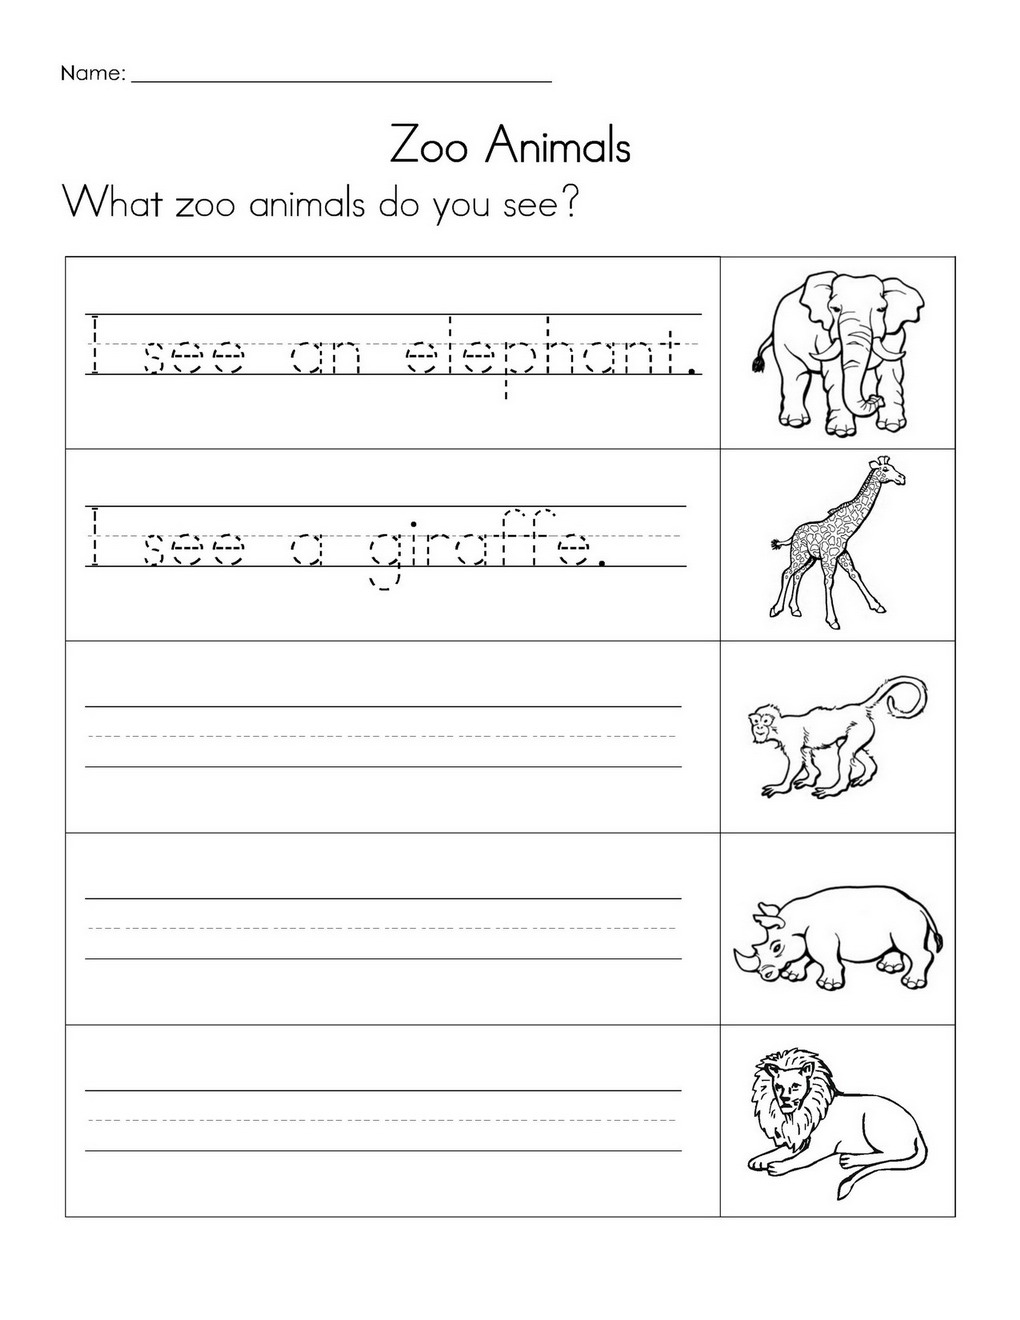 11-best-images-of-zoo-animal-worksheets-zoo-animals-worksheets-printable-wild-zoo-animals